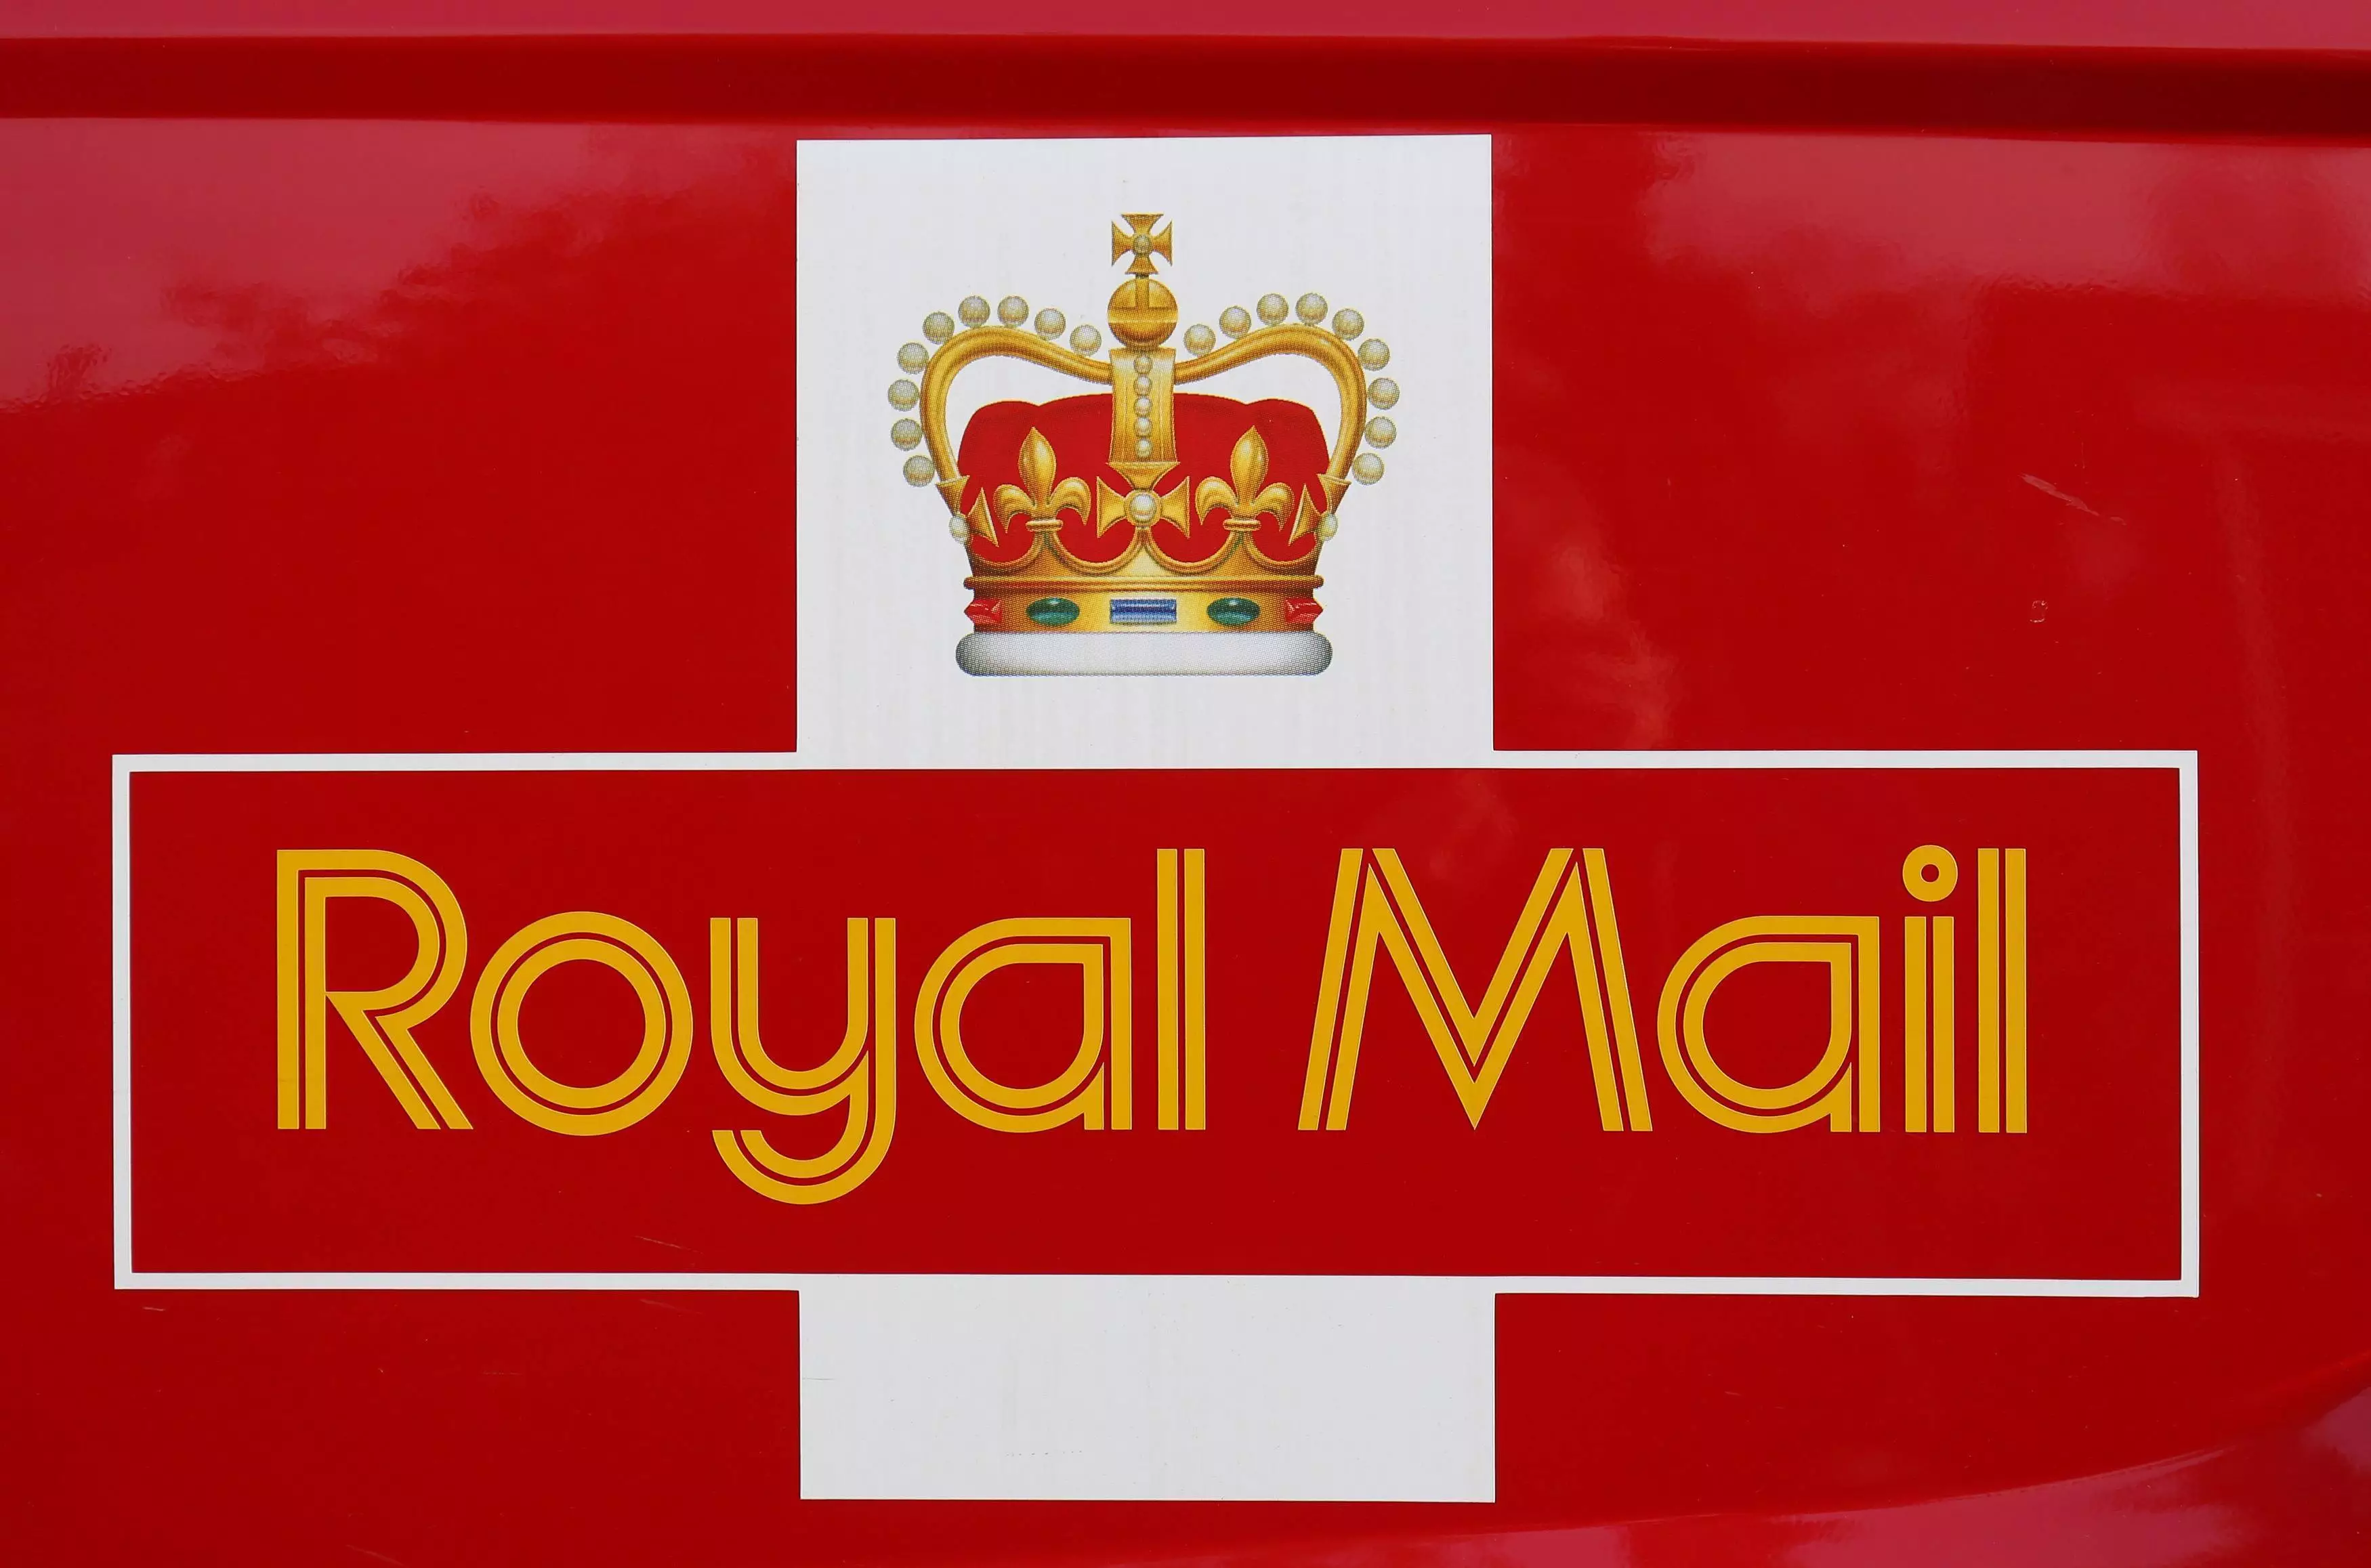 Royal Mail has suspended deliveries to Europe.